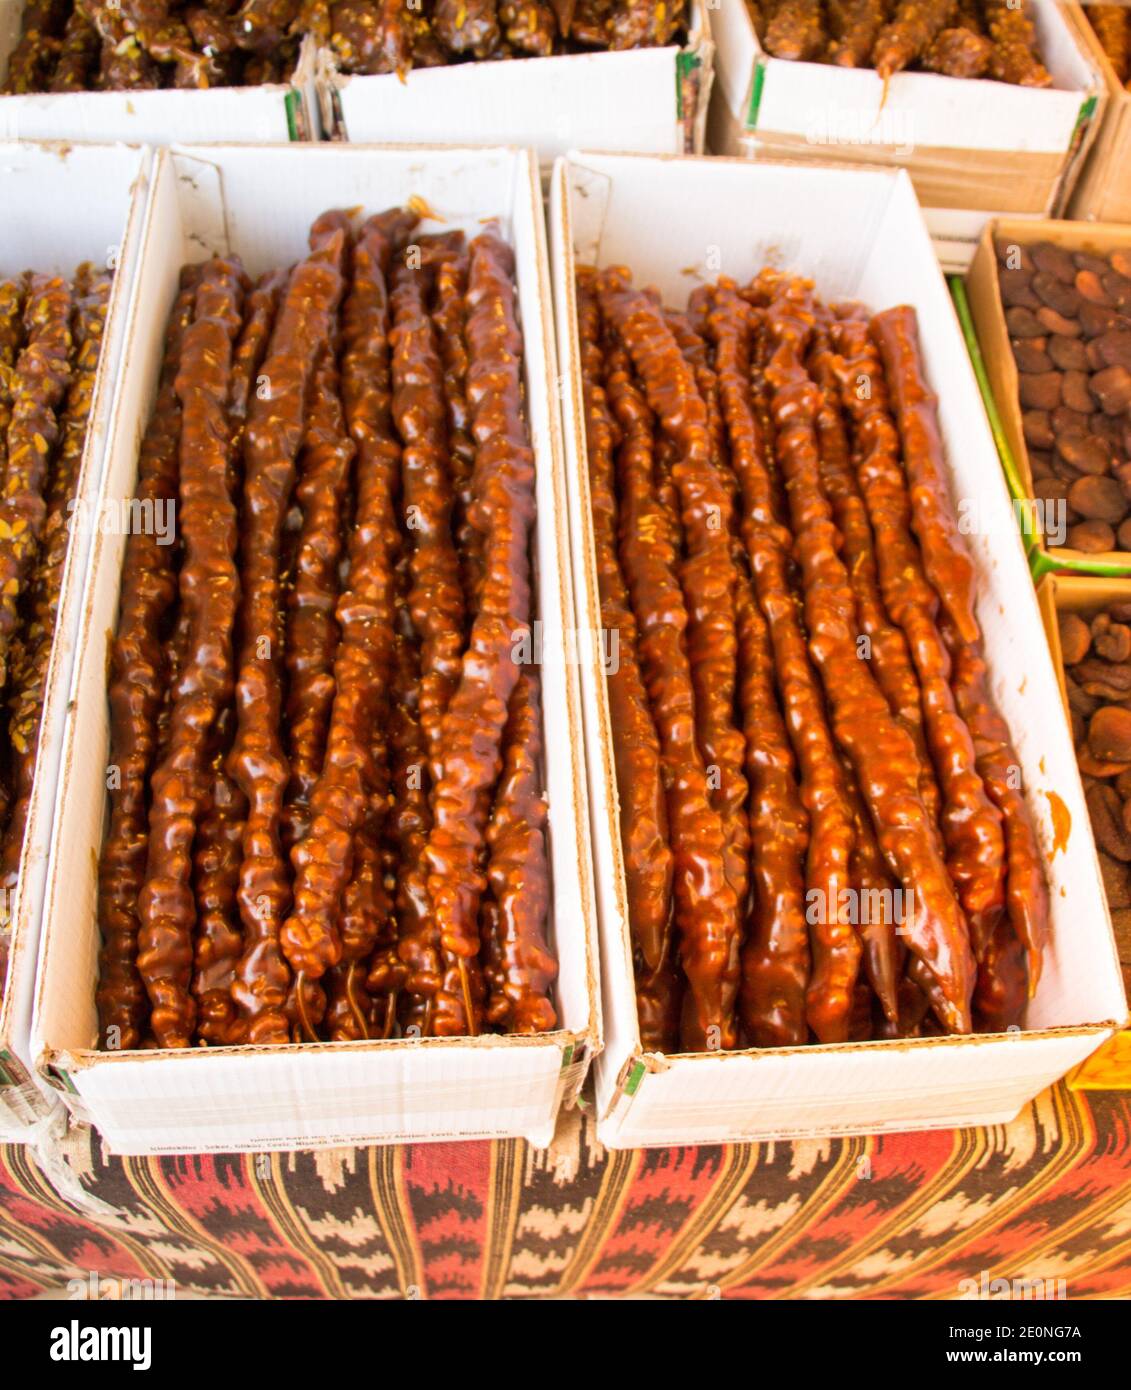 Turkish style dried fruit pulp as snack food. Stock Photo